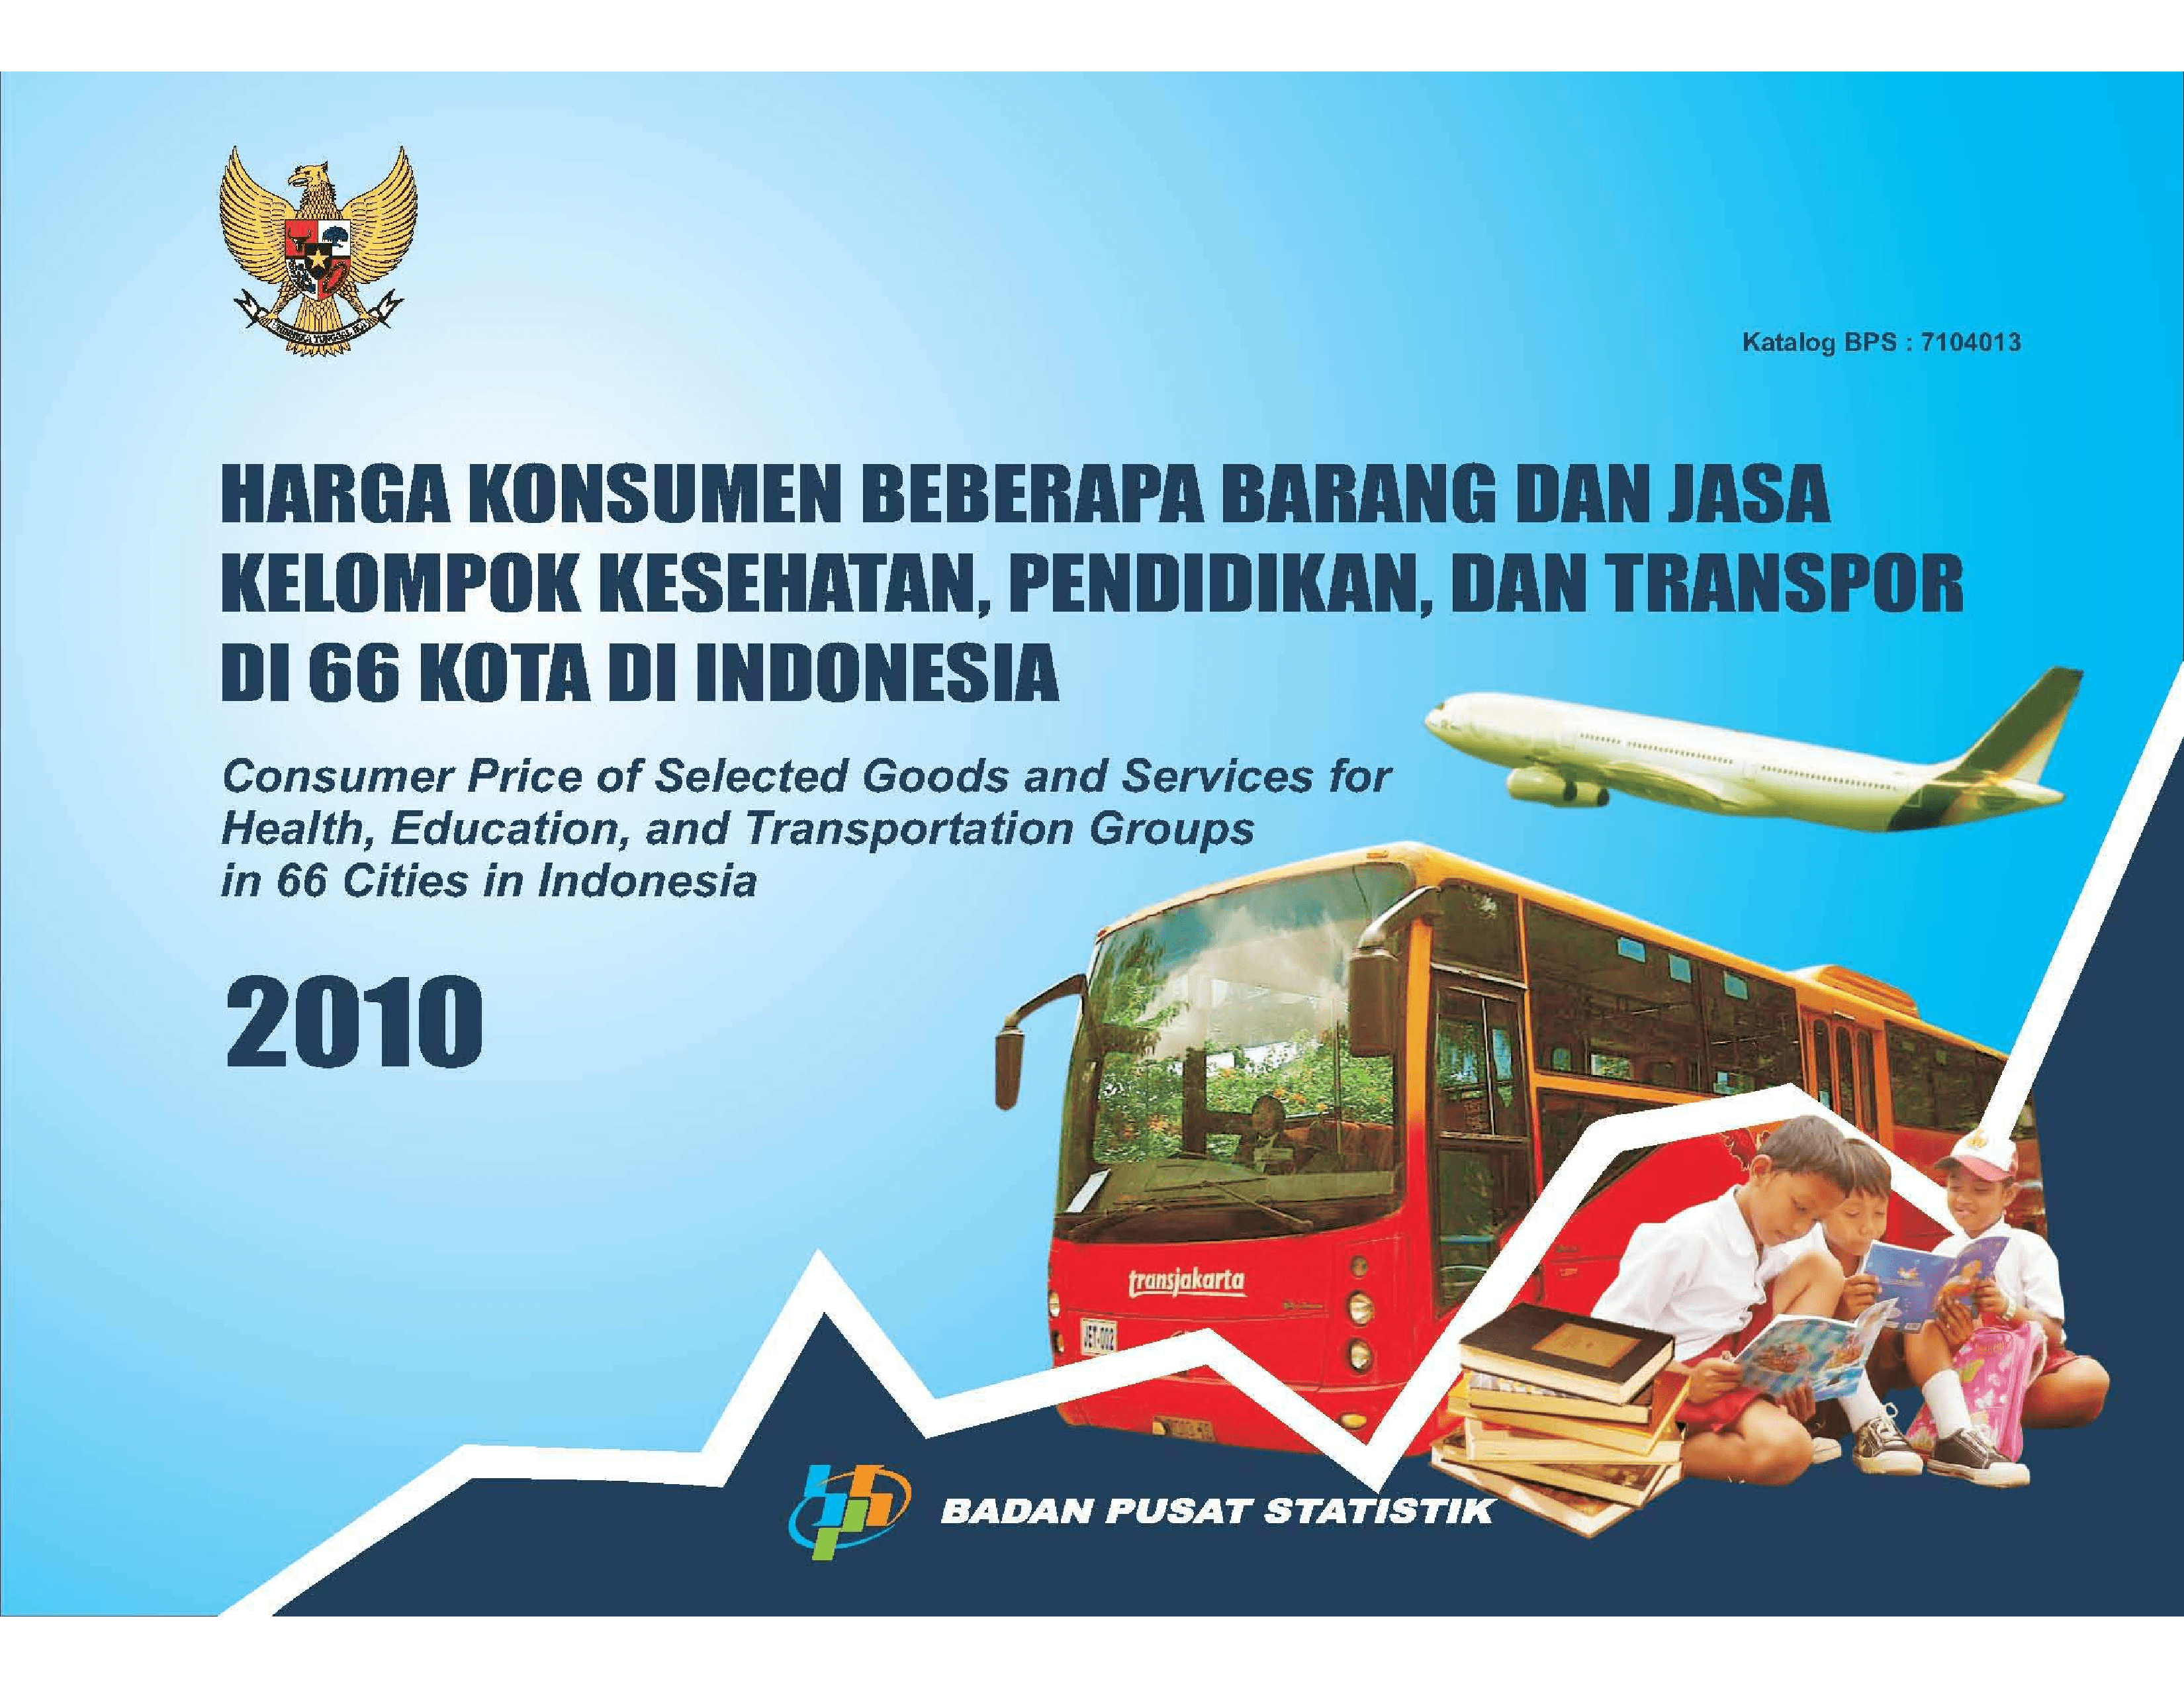 Consumer Price of Some Selected Goods and Services of Health, Education, Transportation Group in 66 Cities in Indonesia 2010